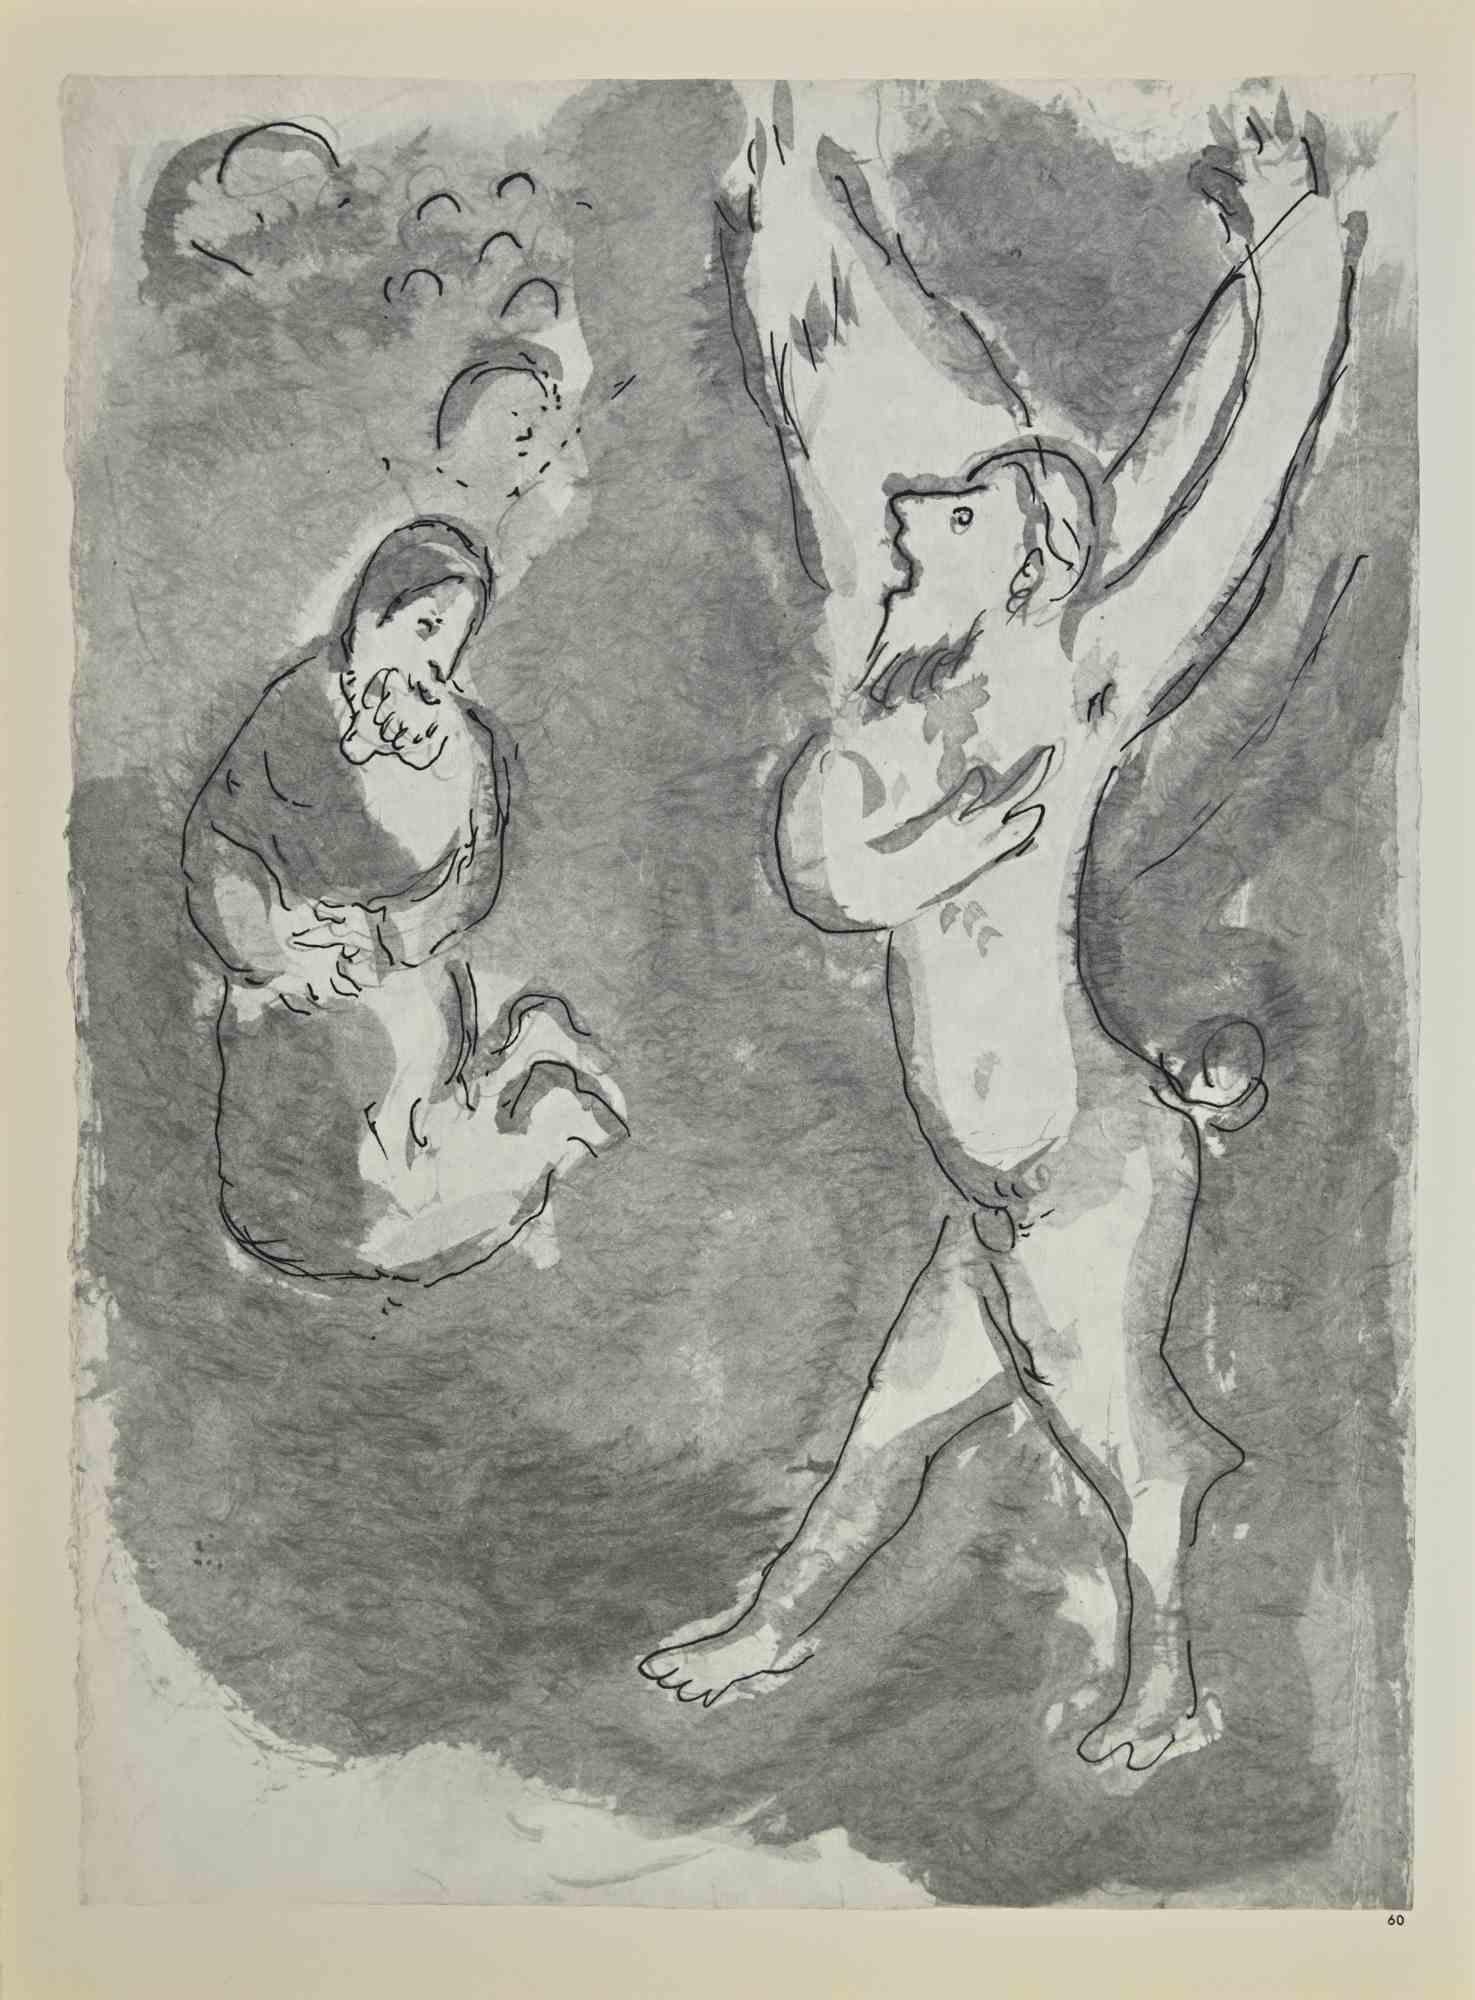 Esther Accuses Haman is an artwork realized by March Chagall, 1960s.

Lithograph on brown-toned paper, no signature.

Lithograph on both sheets.

Edition of 6500 unsigned lithographs. Printed by Mourlot and published by Tériade, Paris.

Ref.